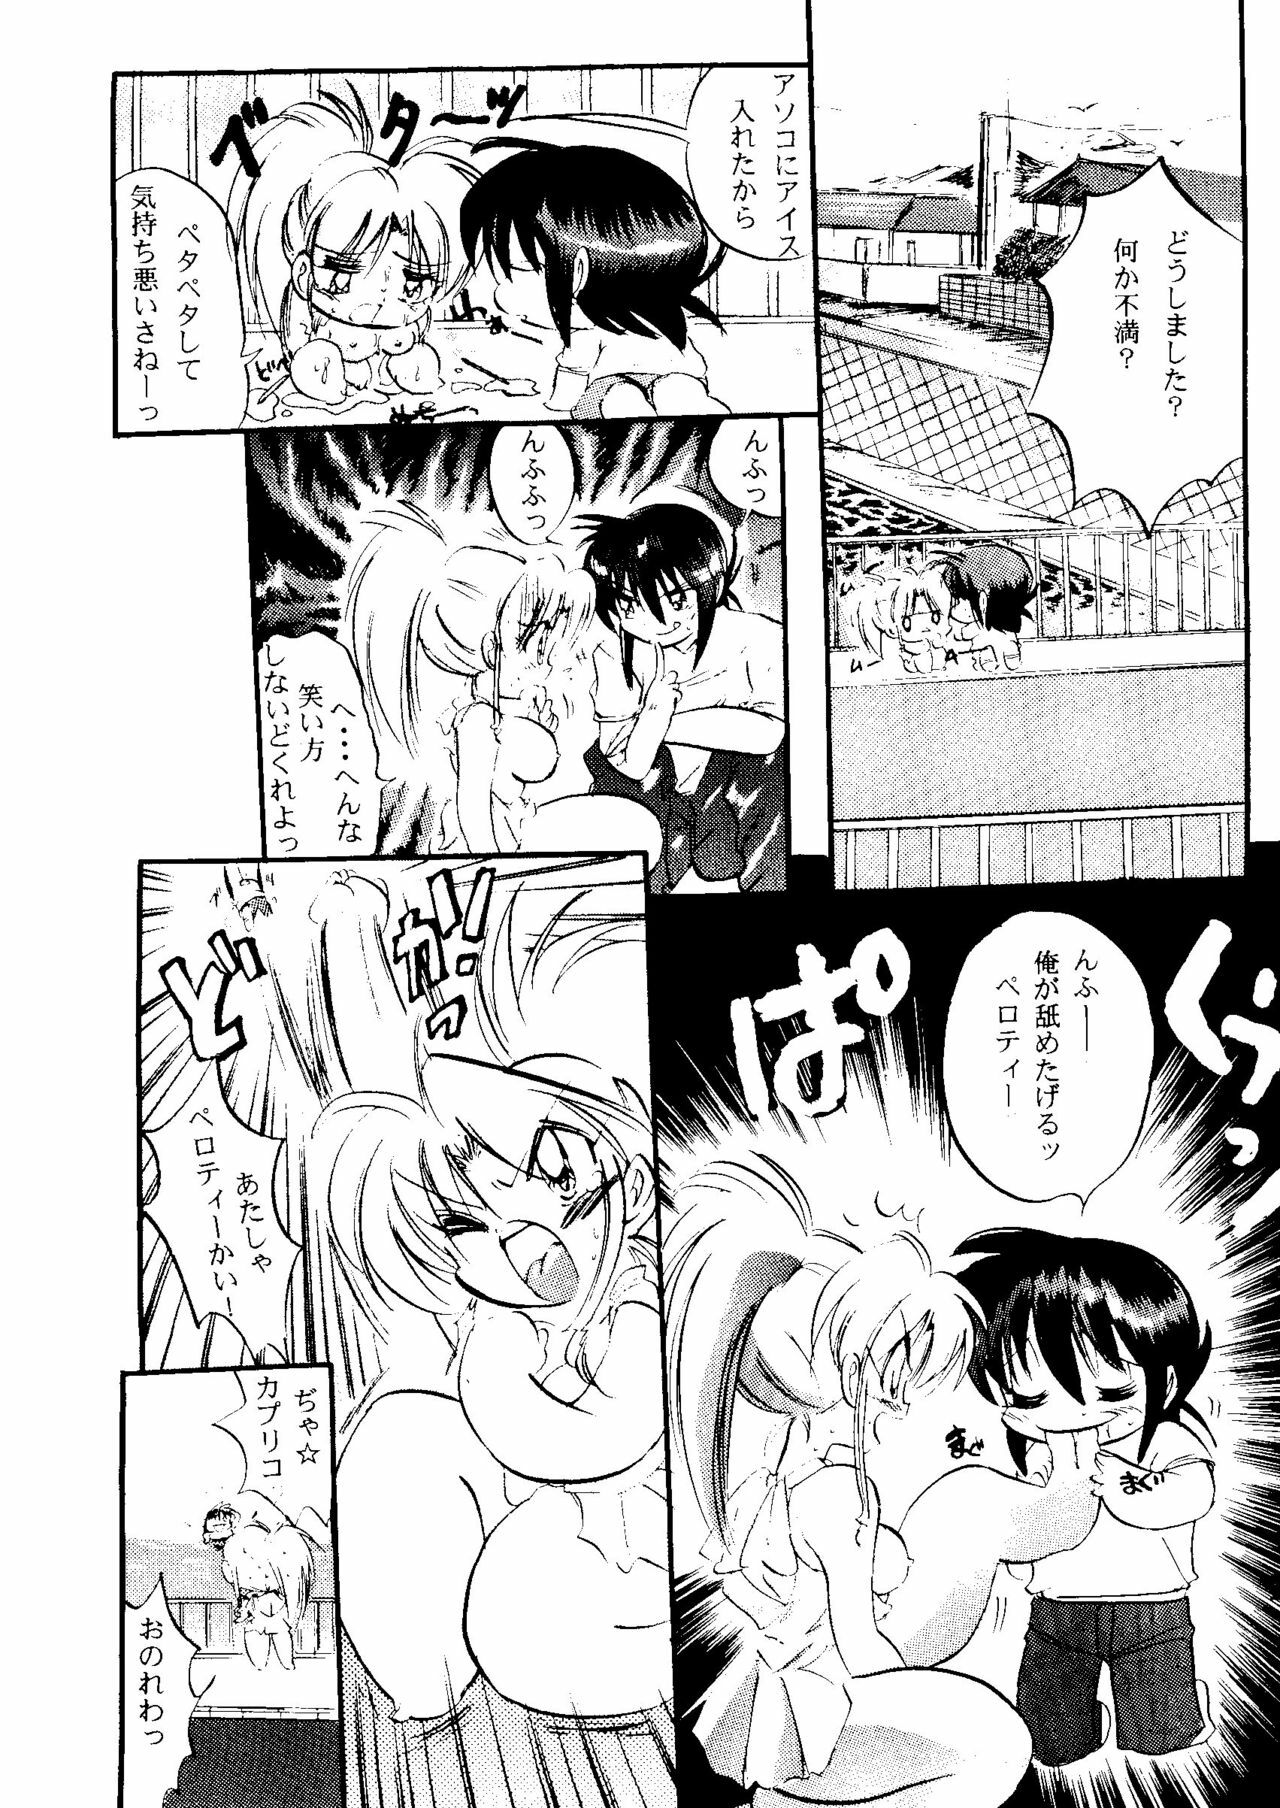 [Anthology] CUTE 1 Koi no Russian Roulette (Various) page 22 full